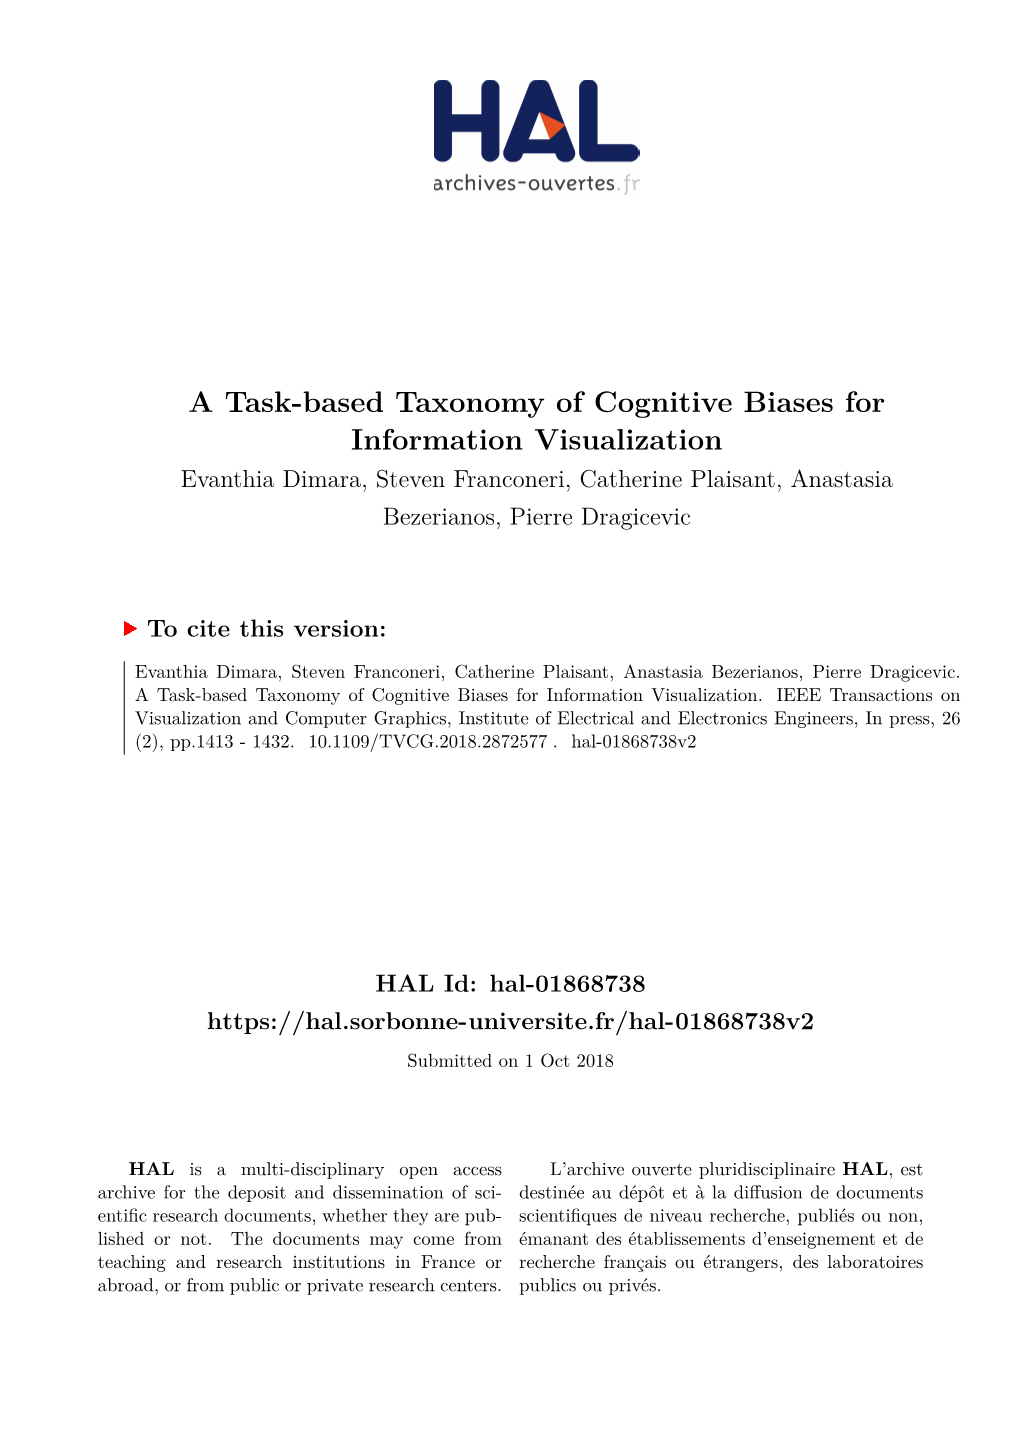 A Task-Based Taxonomy of Cognitive Biases